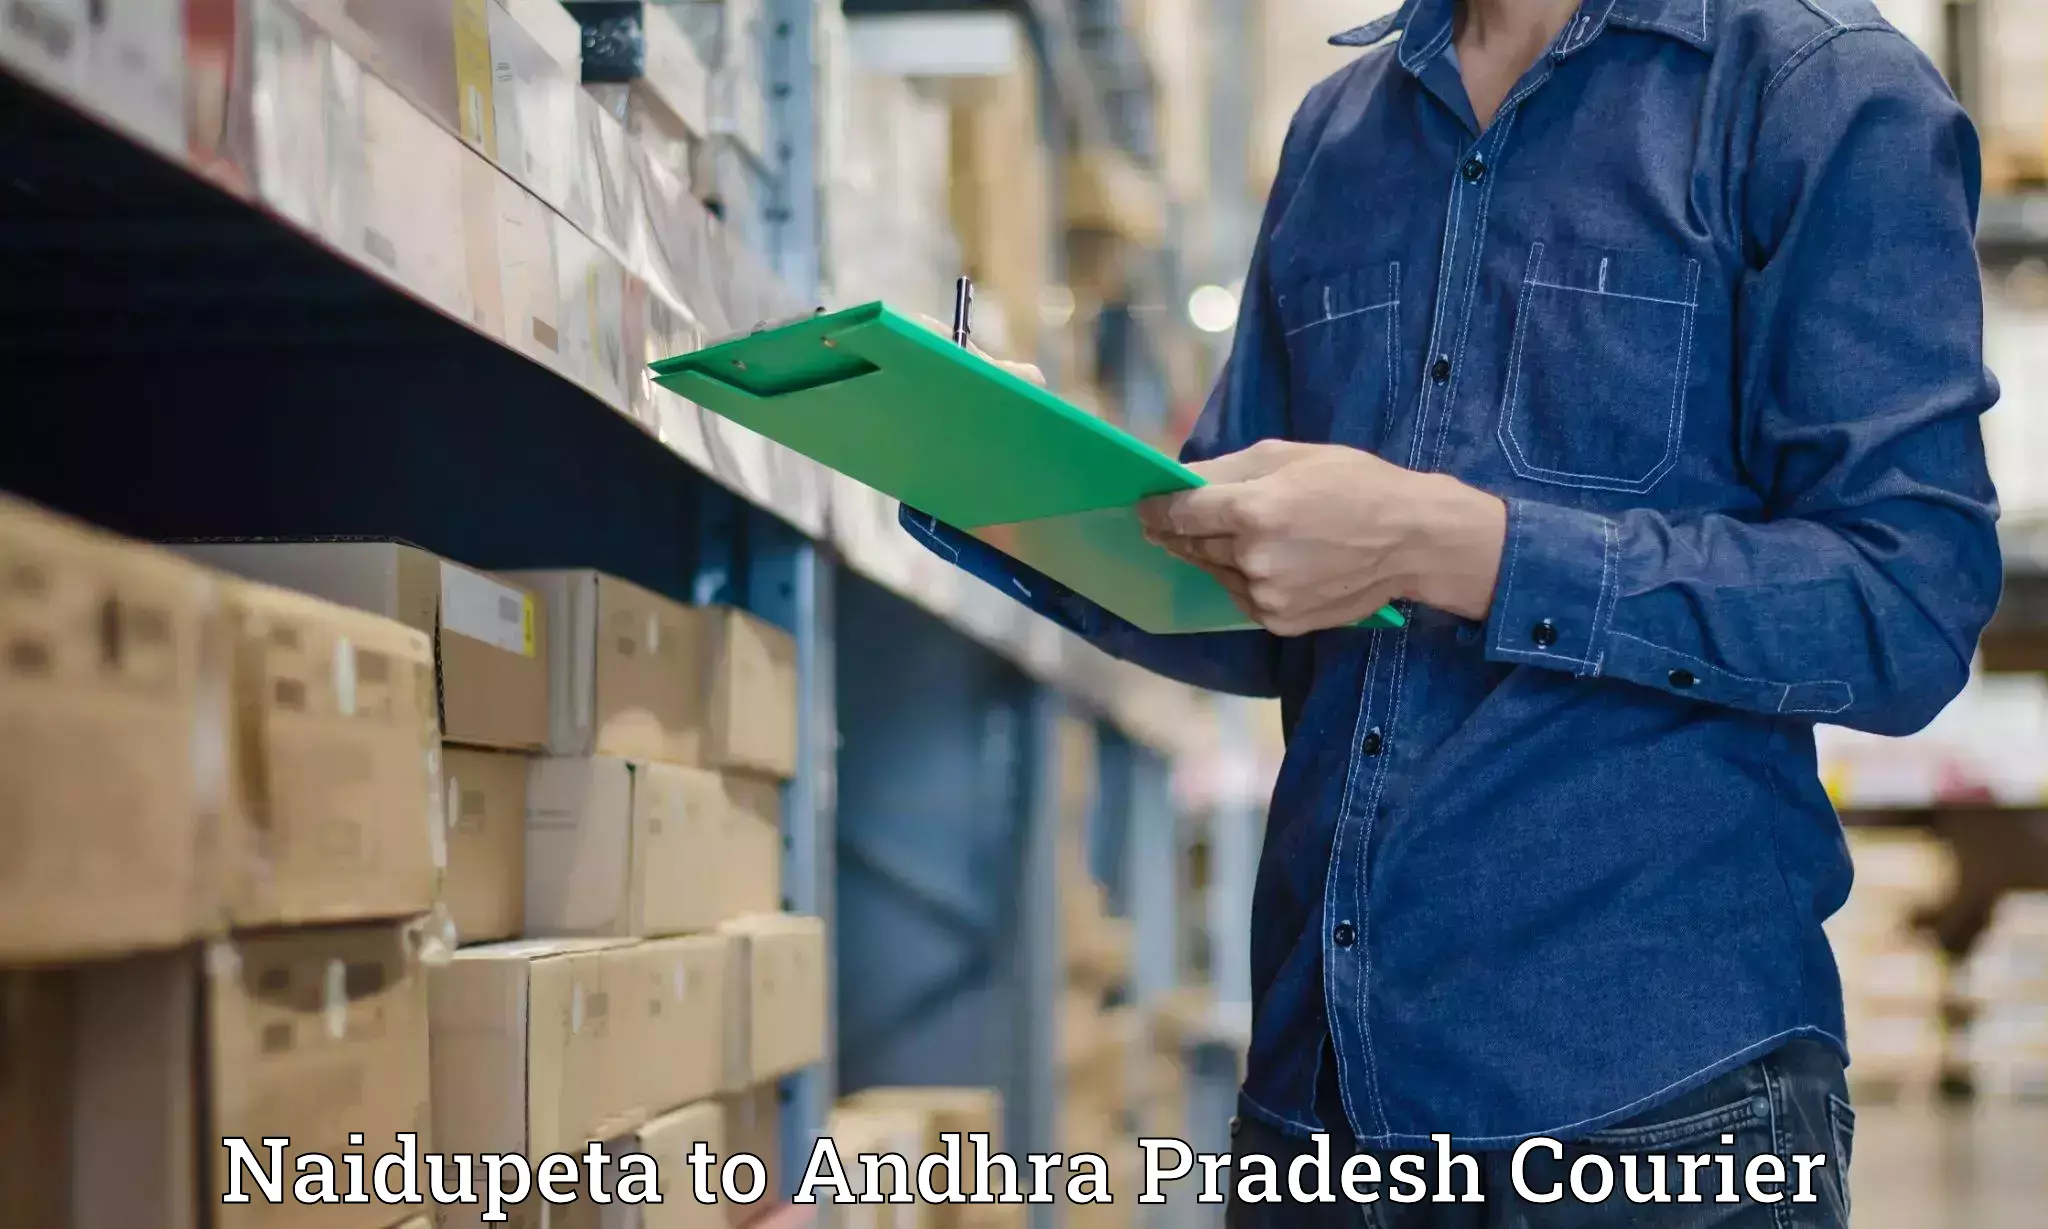 Reliable courier service Naidupeta to Gampalagudem